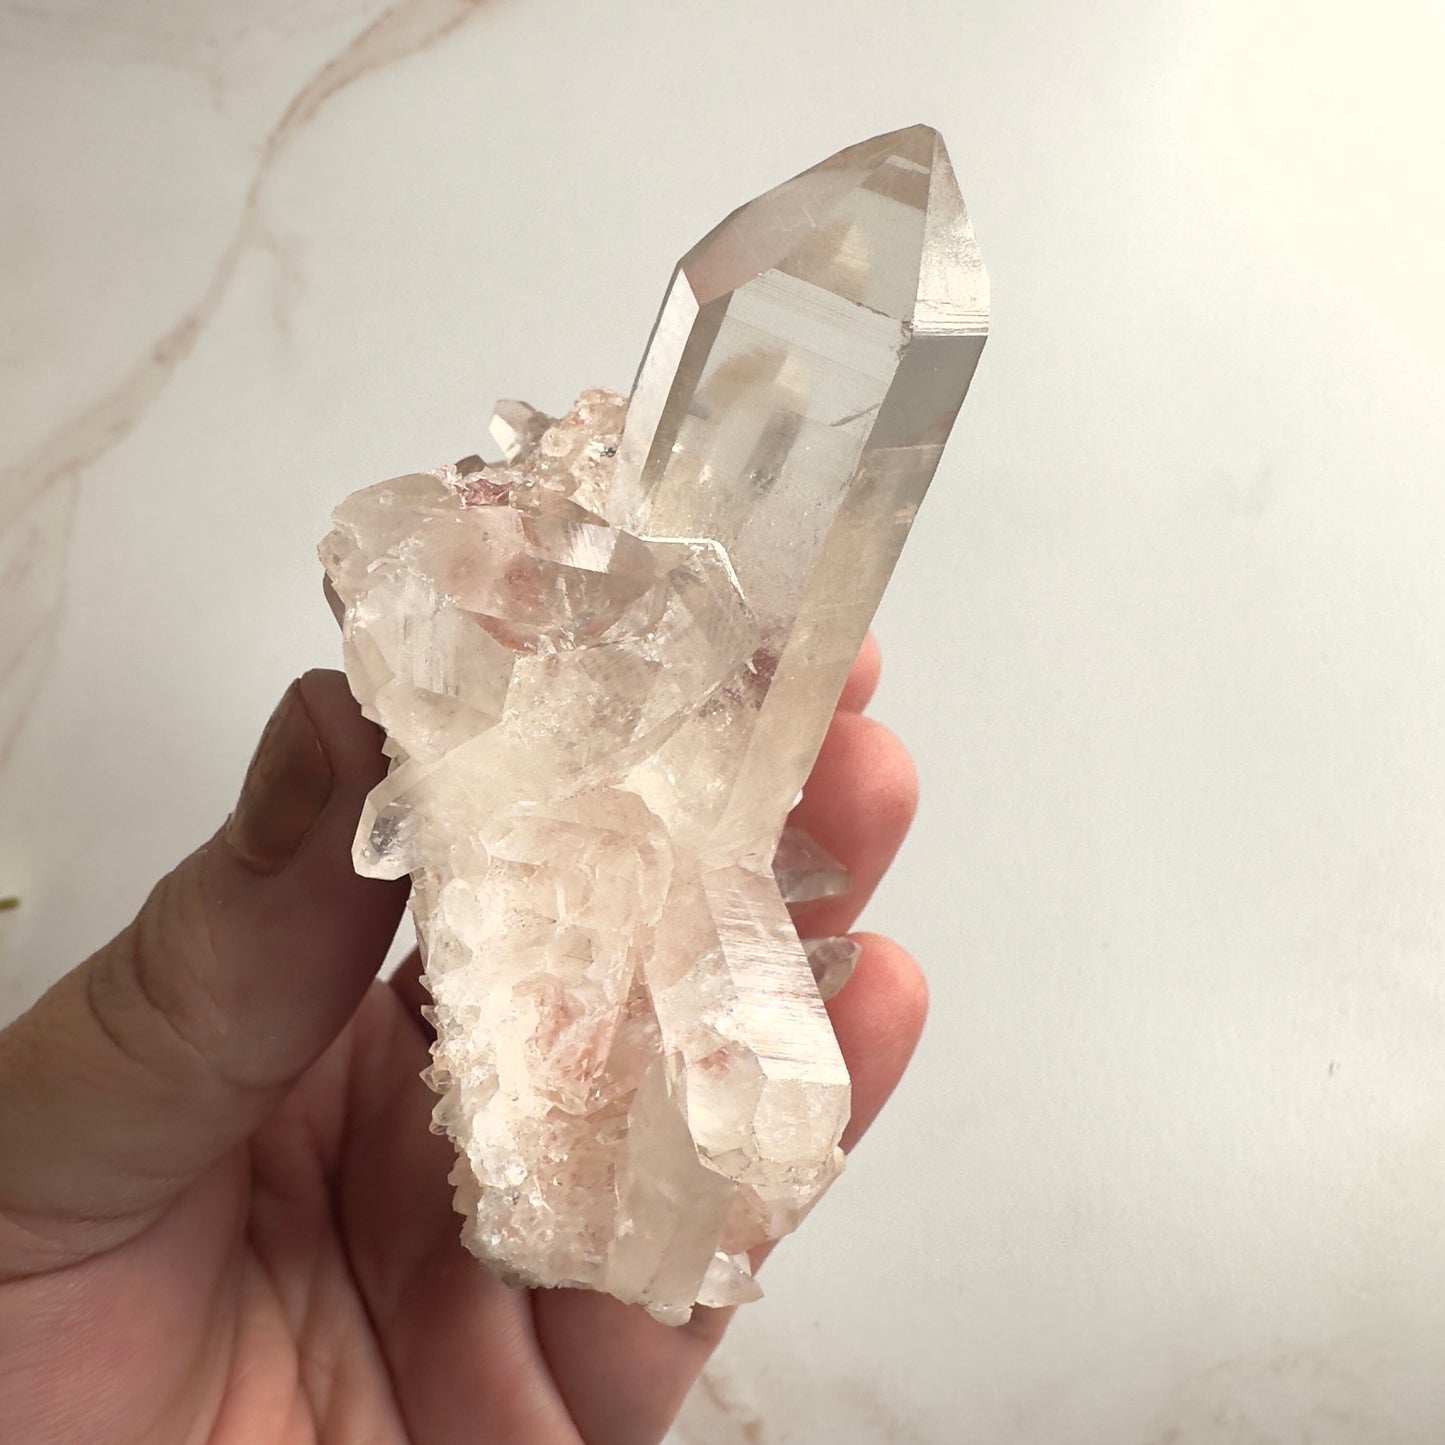 Beautiful Pink Himalayan Samadhi Quartz High-Quality Genuine Specimen Crystal Cluster from India | Tucson Gem Show Exclusive